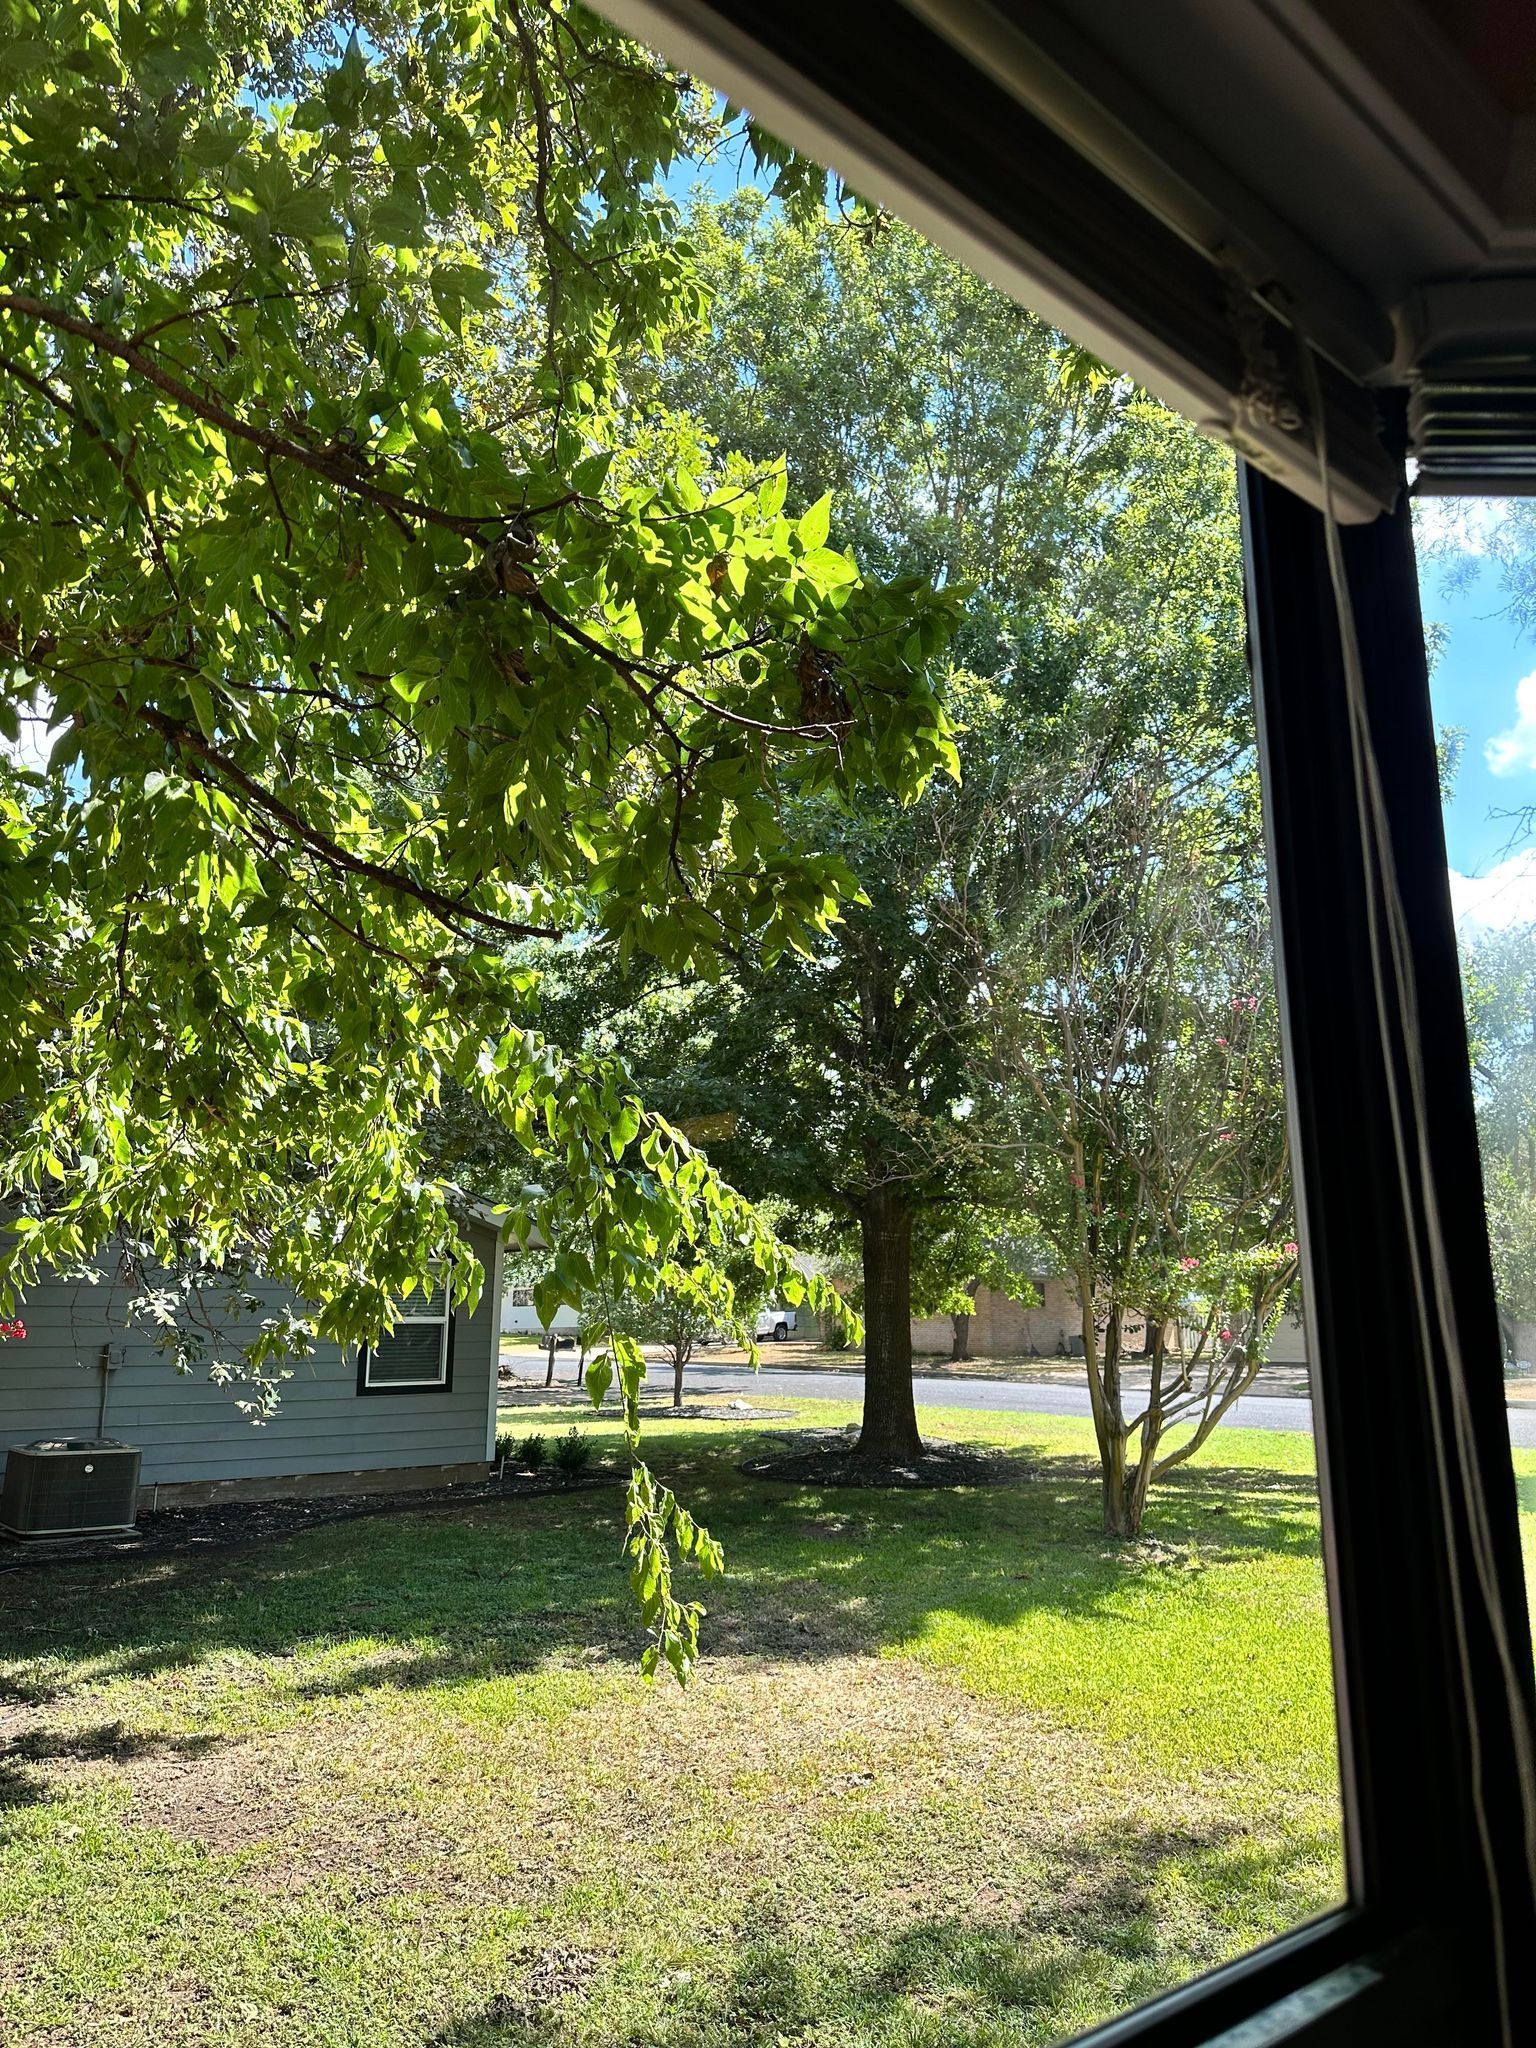 A view of a yard through a window with trees and grass.